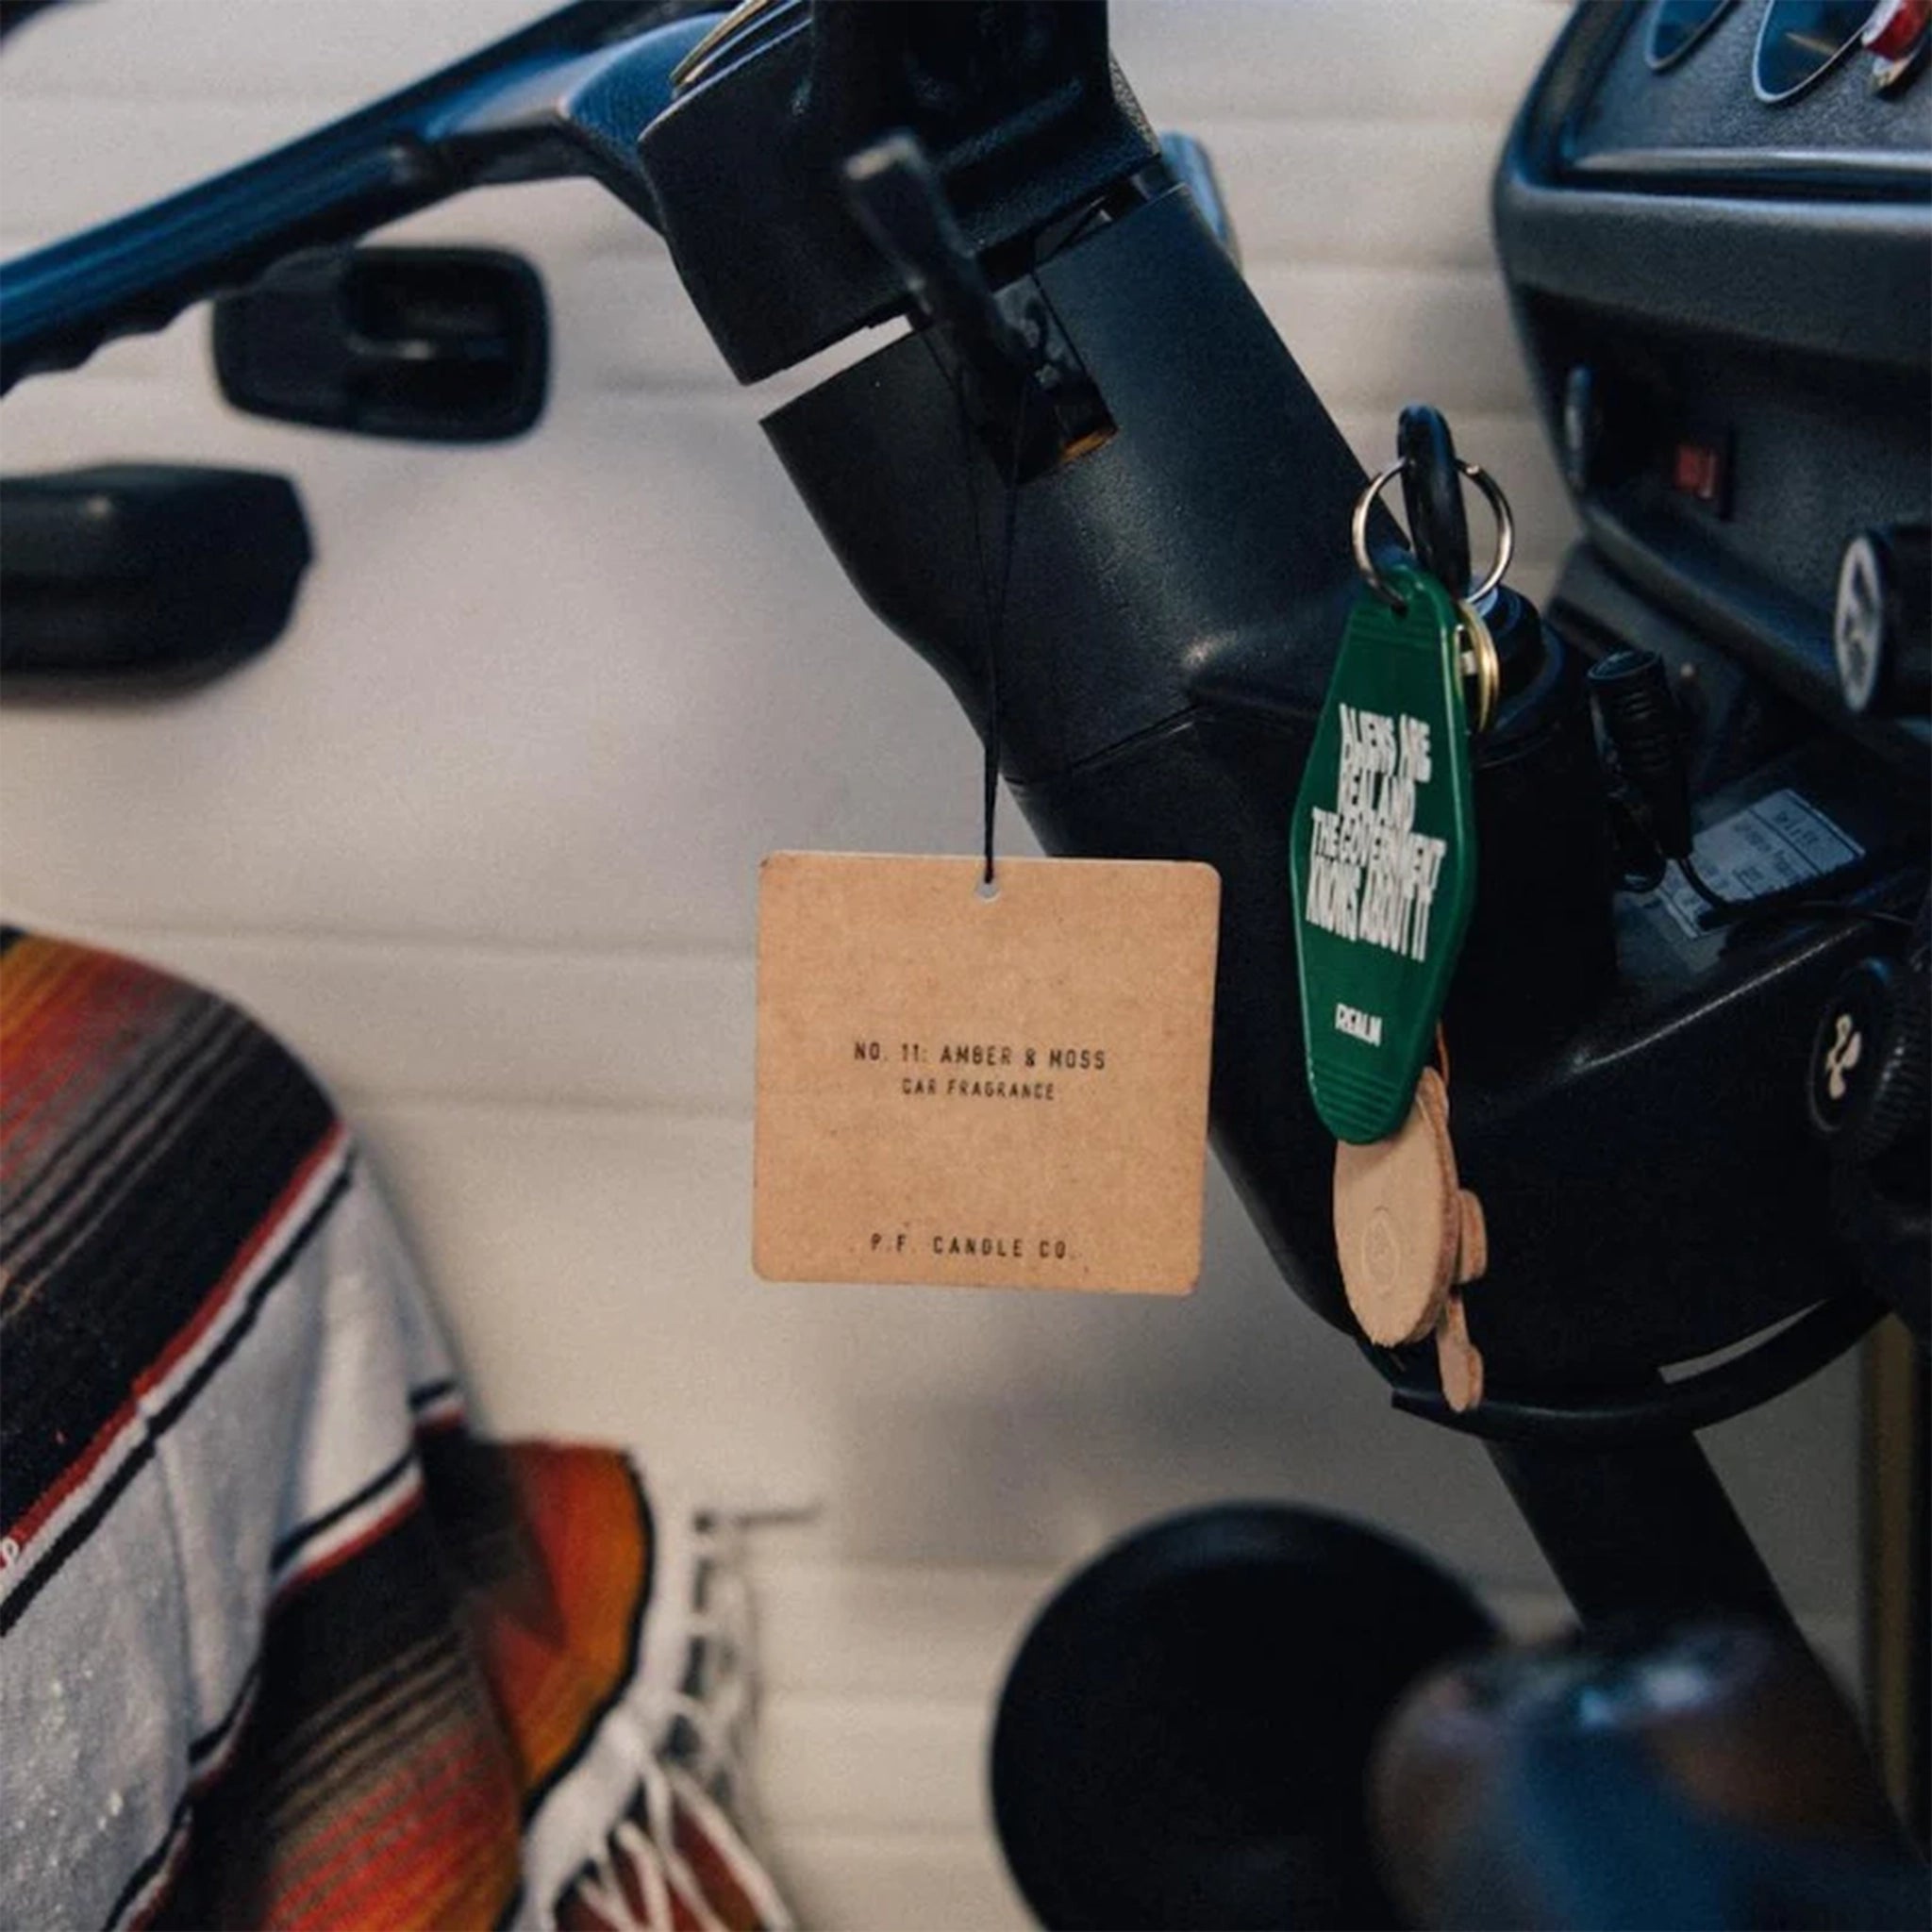 The square cardboard car fragrance hanging from the steering wheel of a car.